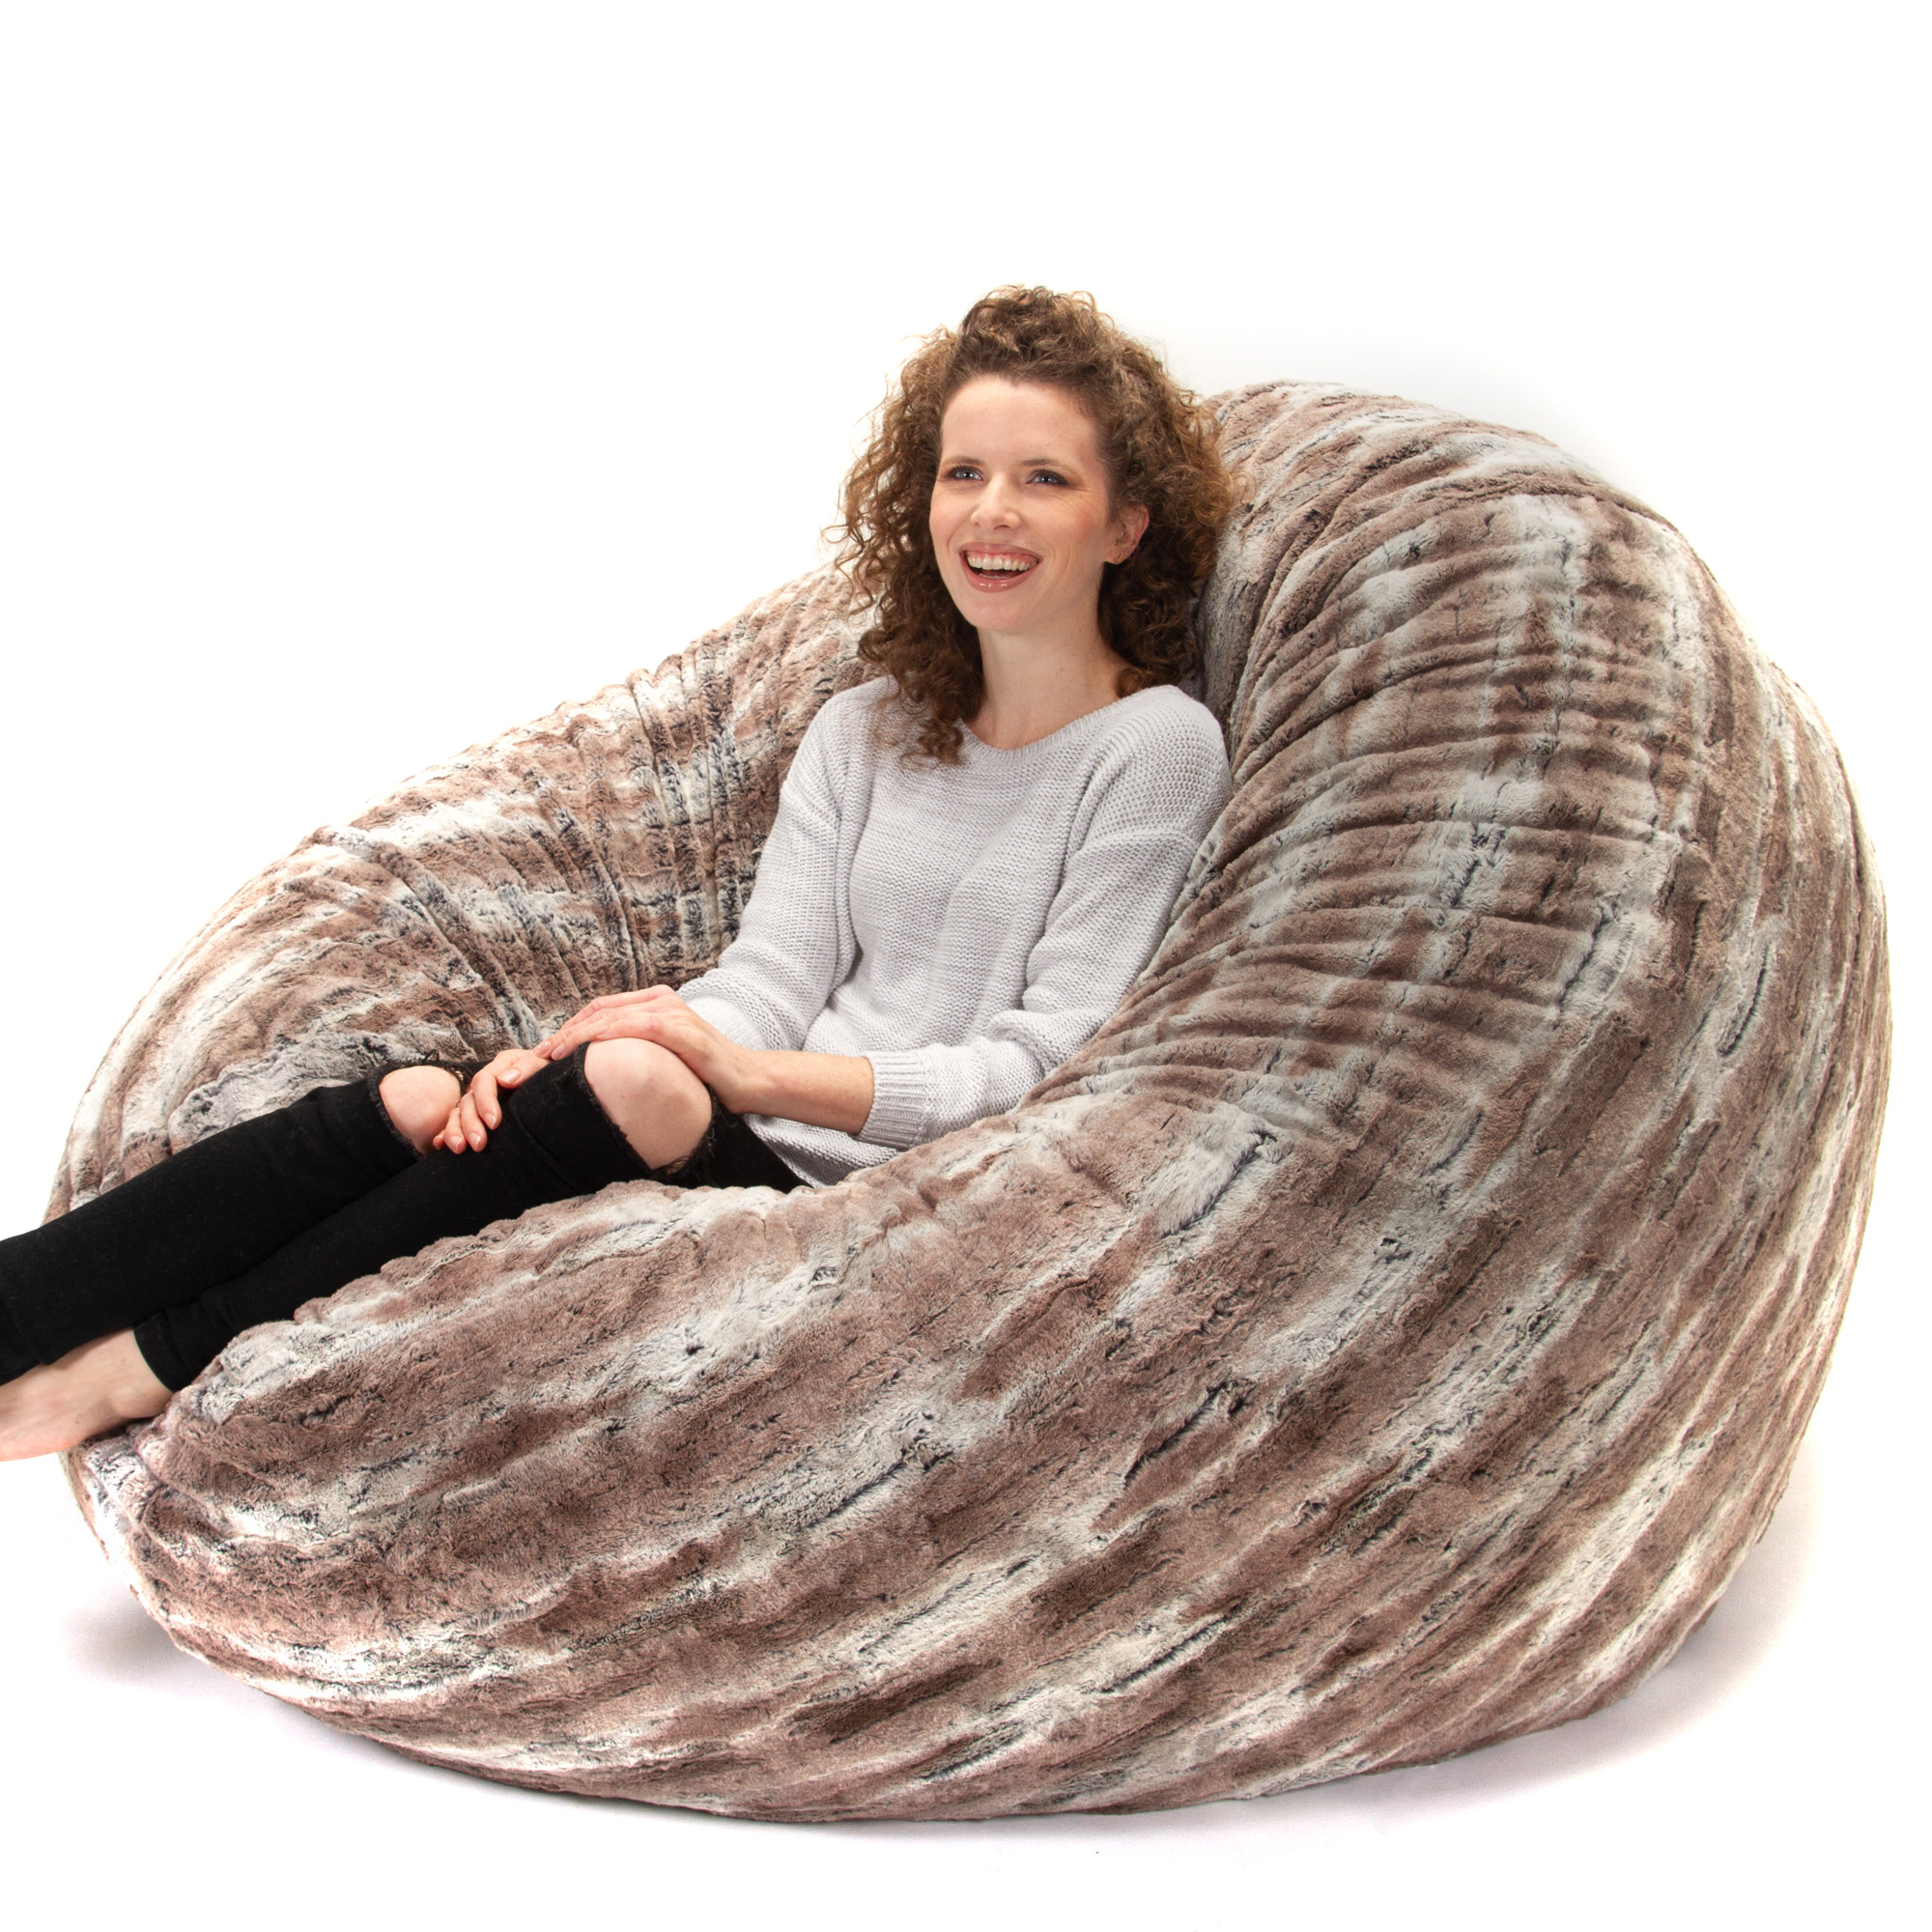 Jaxx 6 Foot Cocoon - Large Bean Bag Chair for Adults, Premium Luxe Faux ...